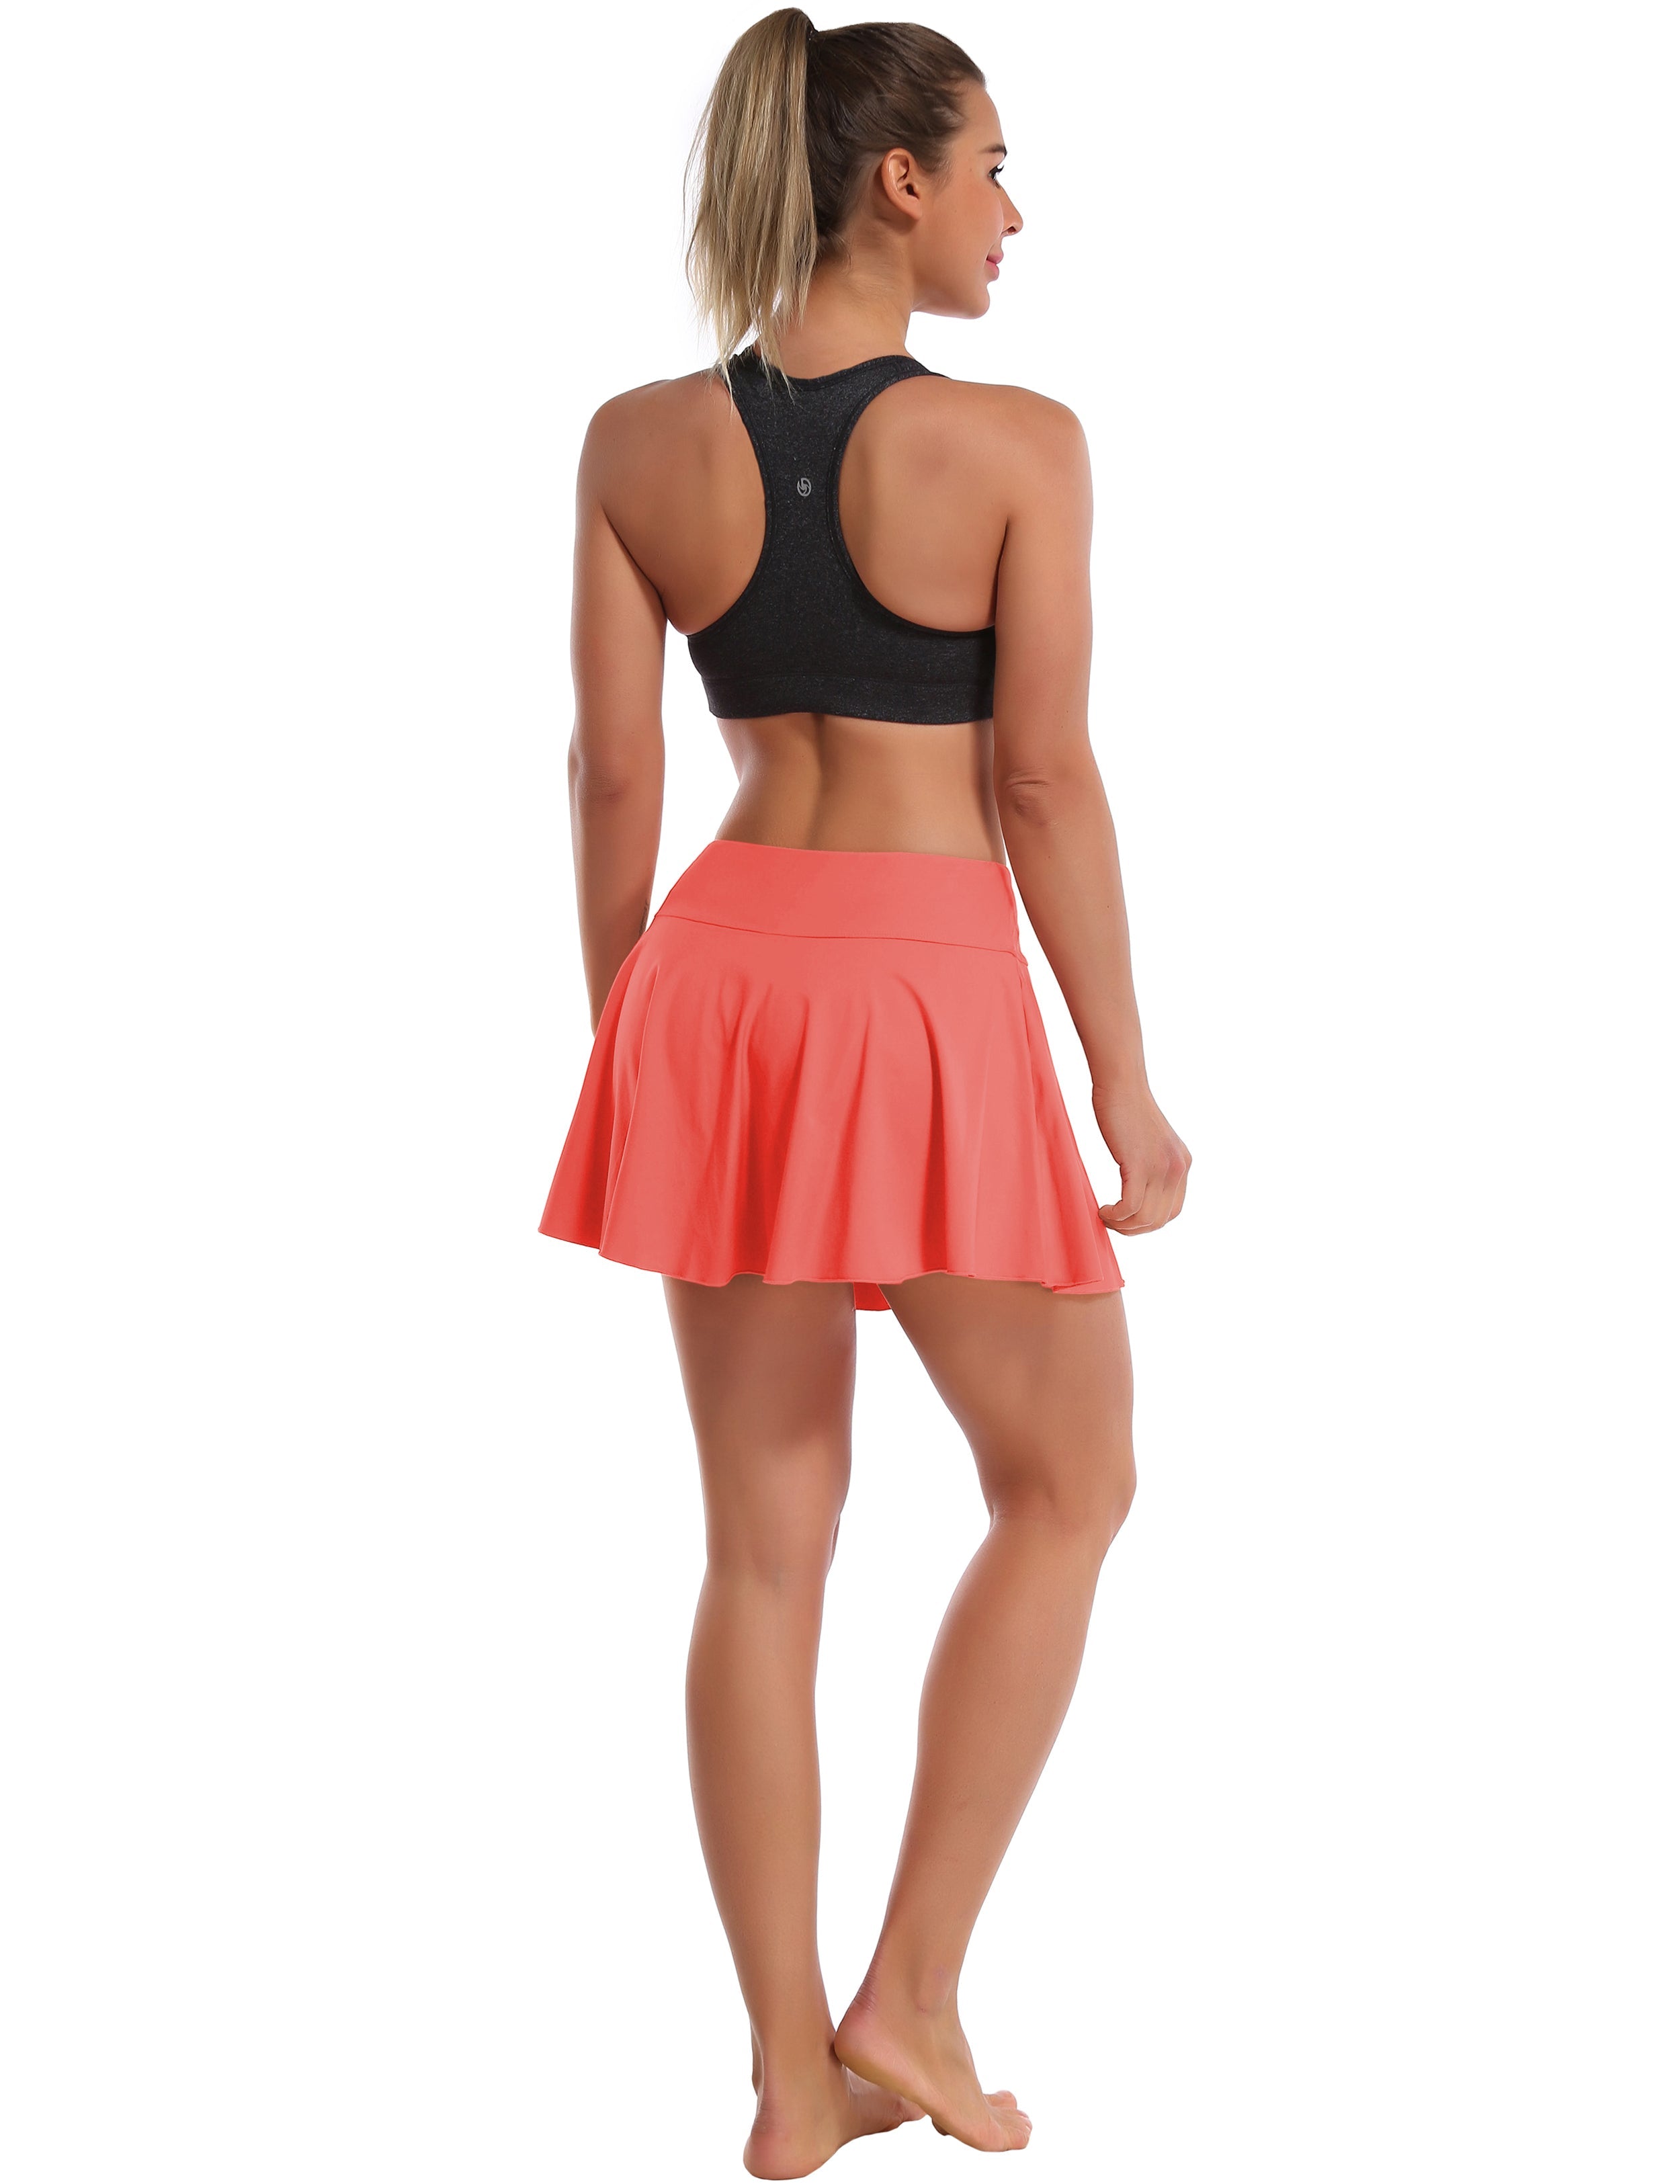 Athletic Tennis Golf Pleated Skort Awith Pocket Shorts coral 80%Nylon/20%Spandex UPF 50+ sun protection Elastic closure Lightweight, Wrinkle Moisture wicking Quick drying Secure & comfortable two layer Hidden pocket